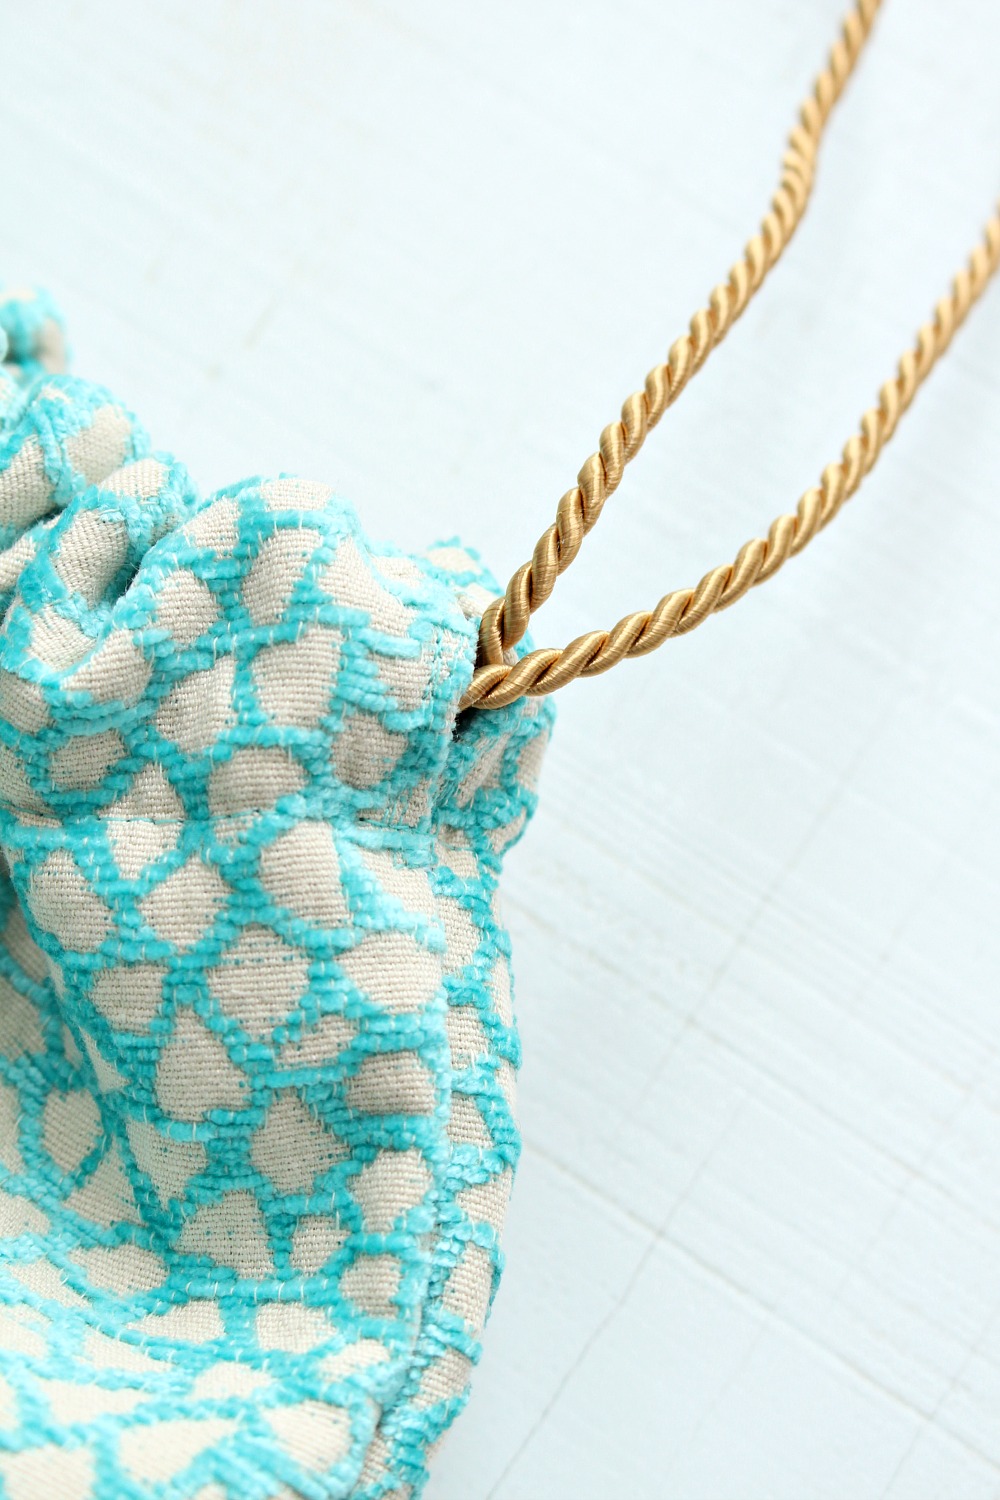 How to Sew a Channel for Drawstring